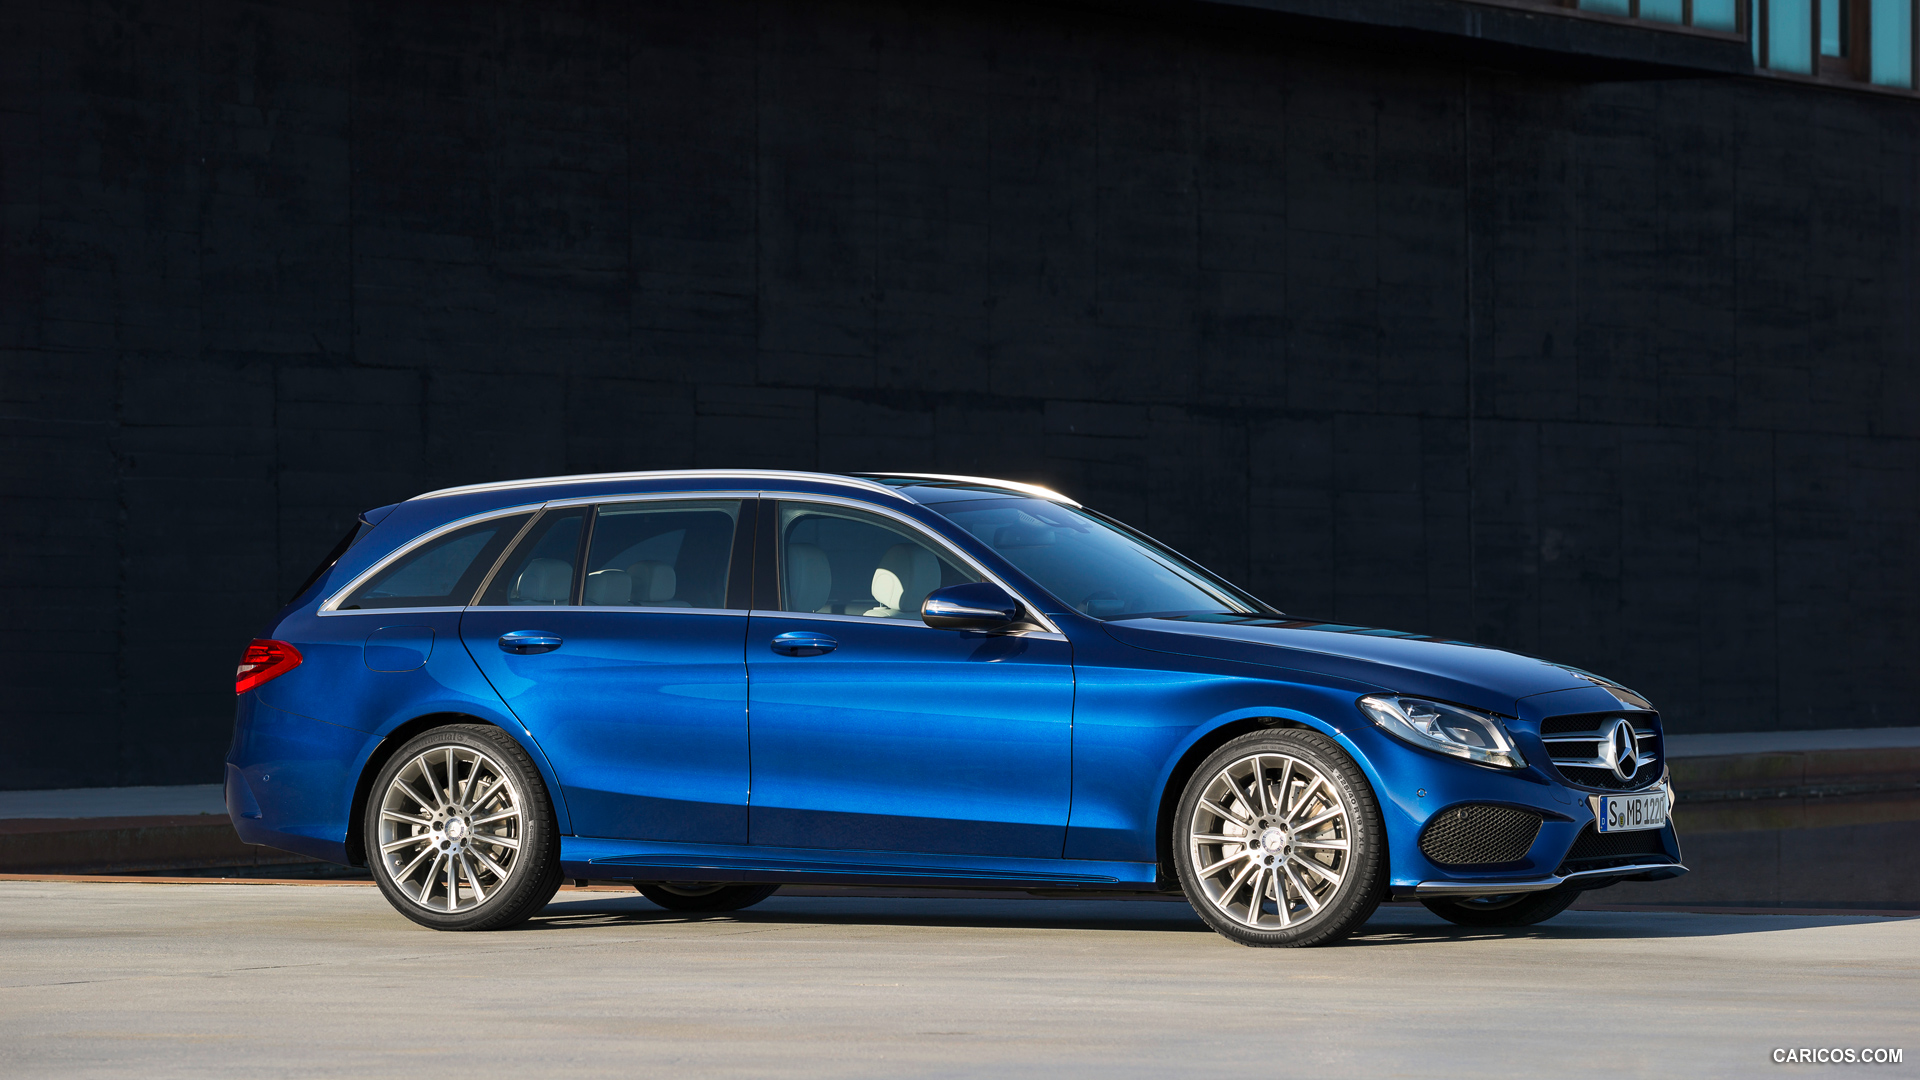 2015 Mercedes-Benz C-Class Estate C250 BlueTEC 4MATIC (AMG sports package) - Side, #51 of 173